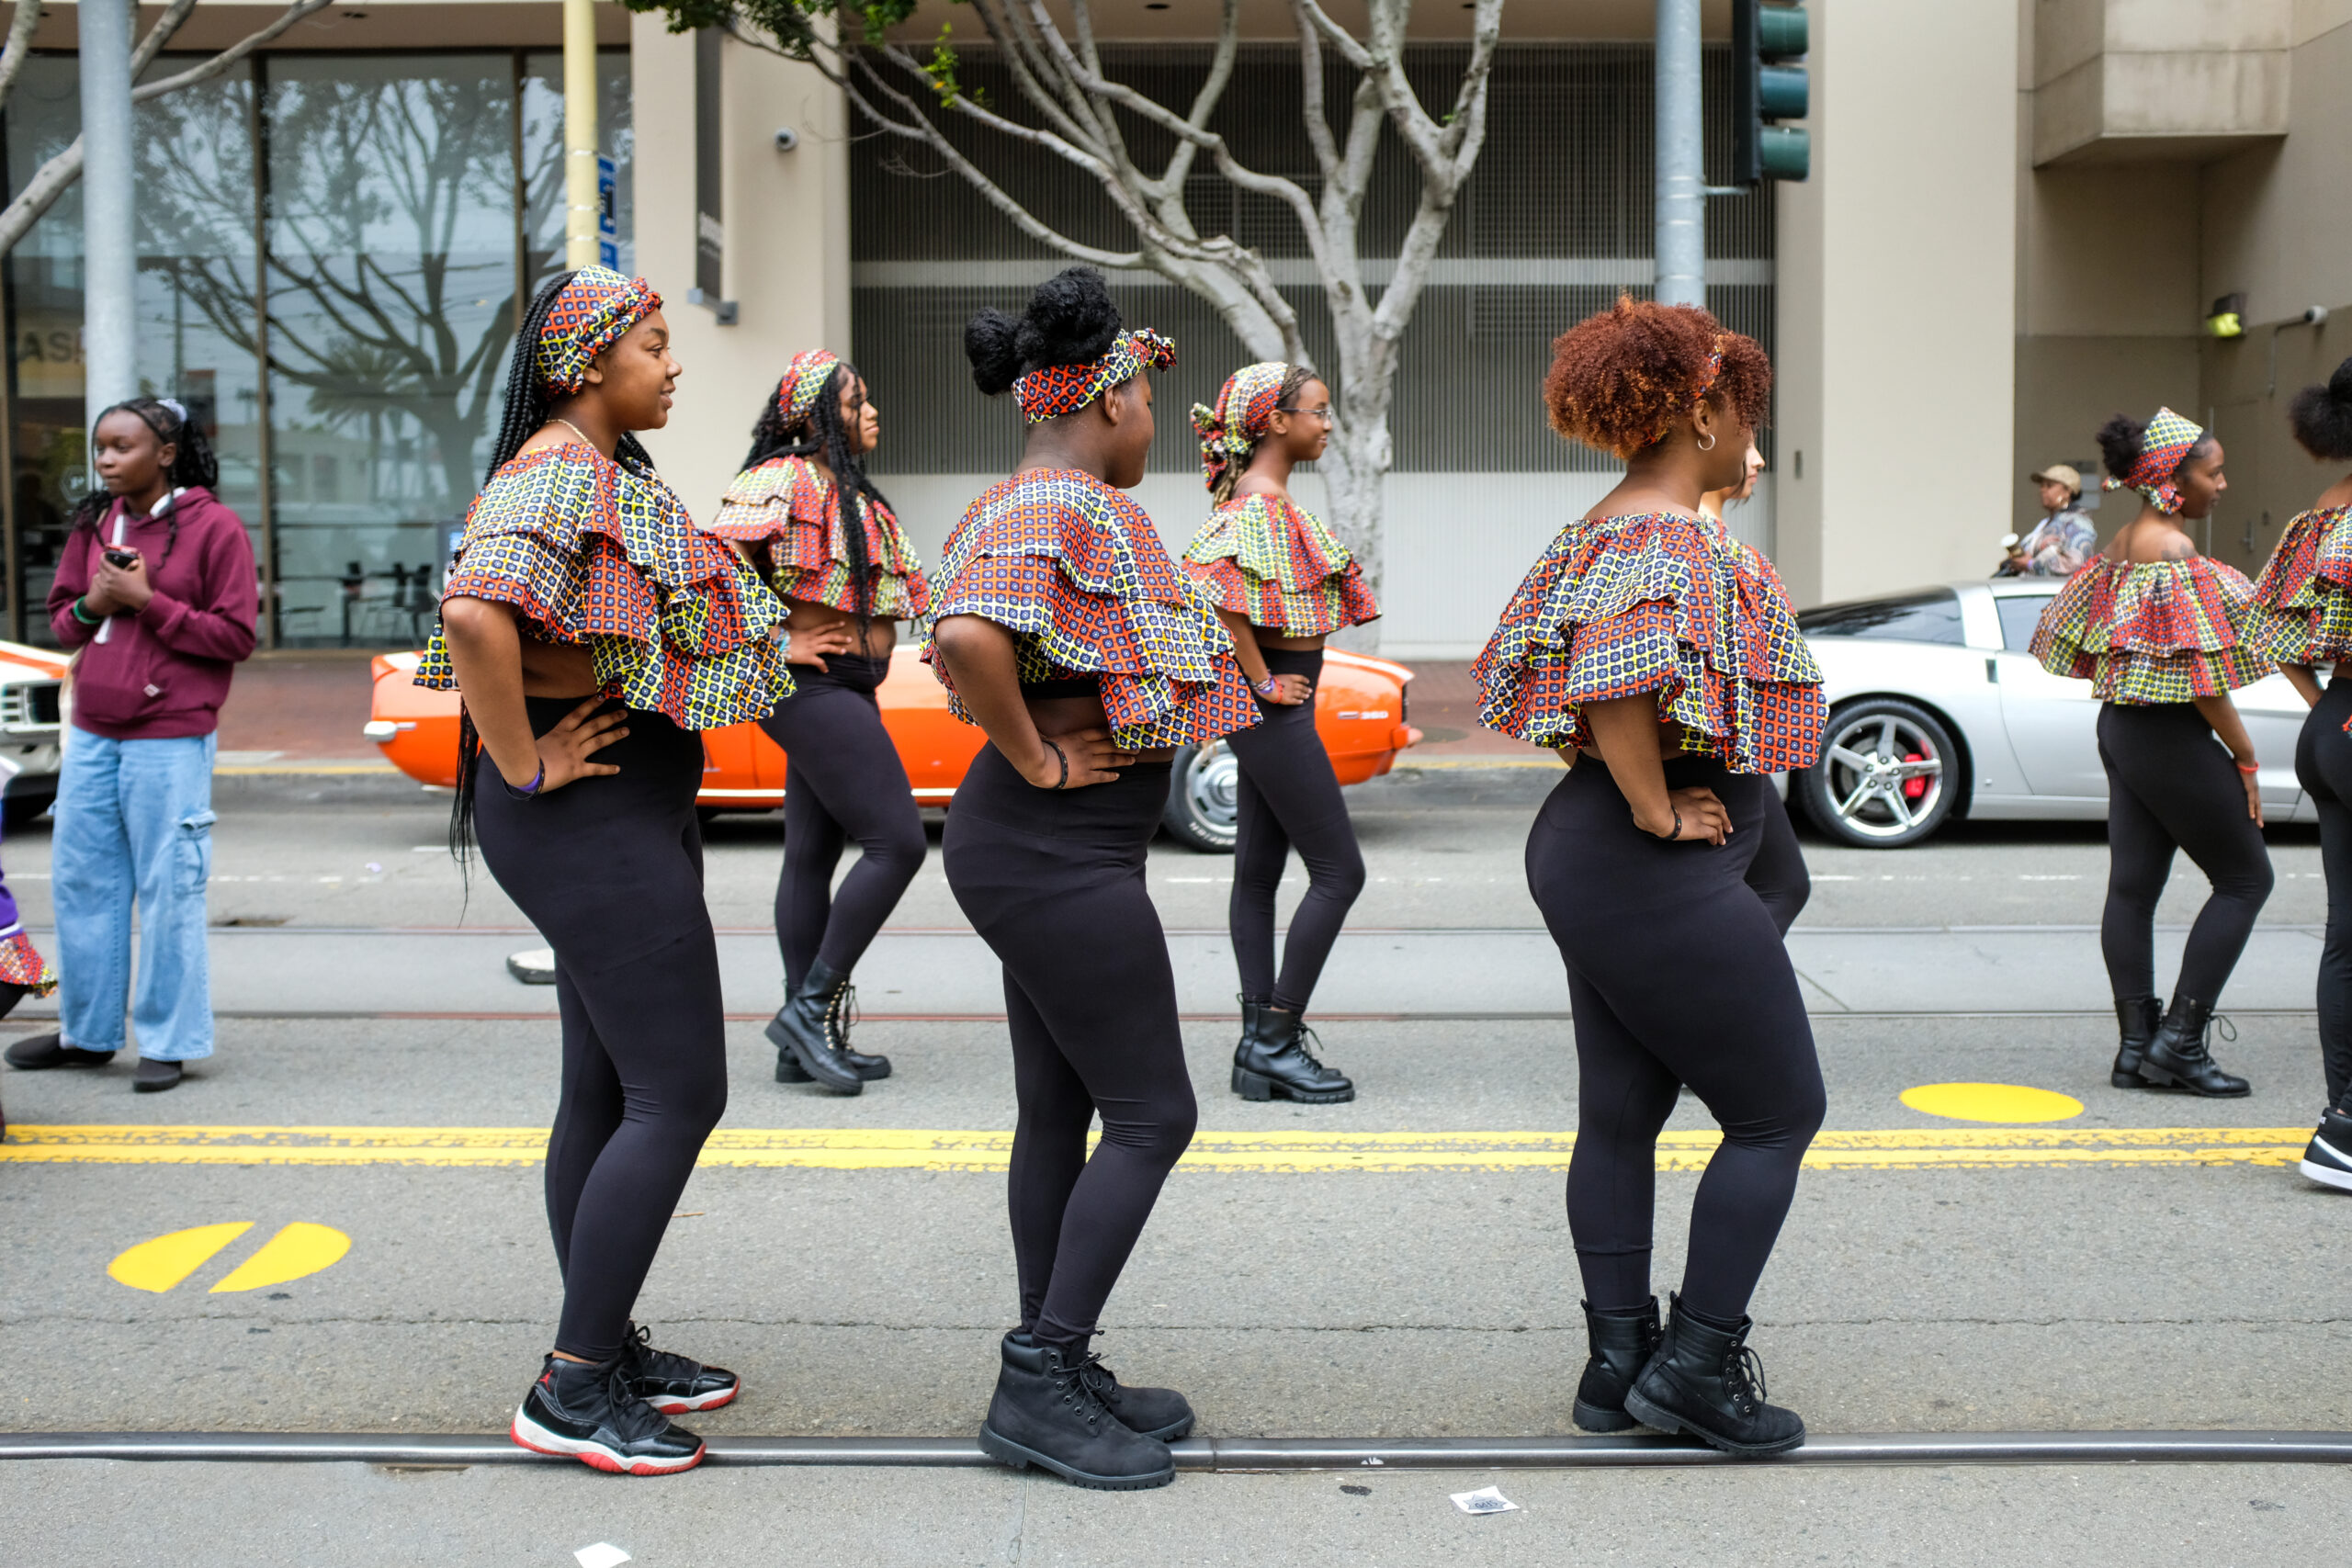 A group of dancers in matching tops and headwraps, black leggings, and boots are lined up on a street.